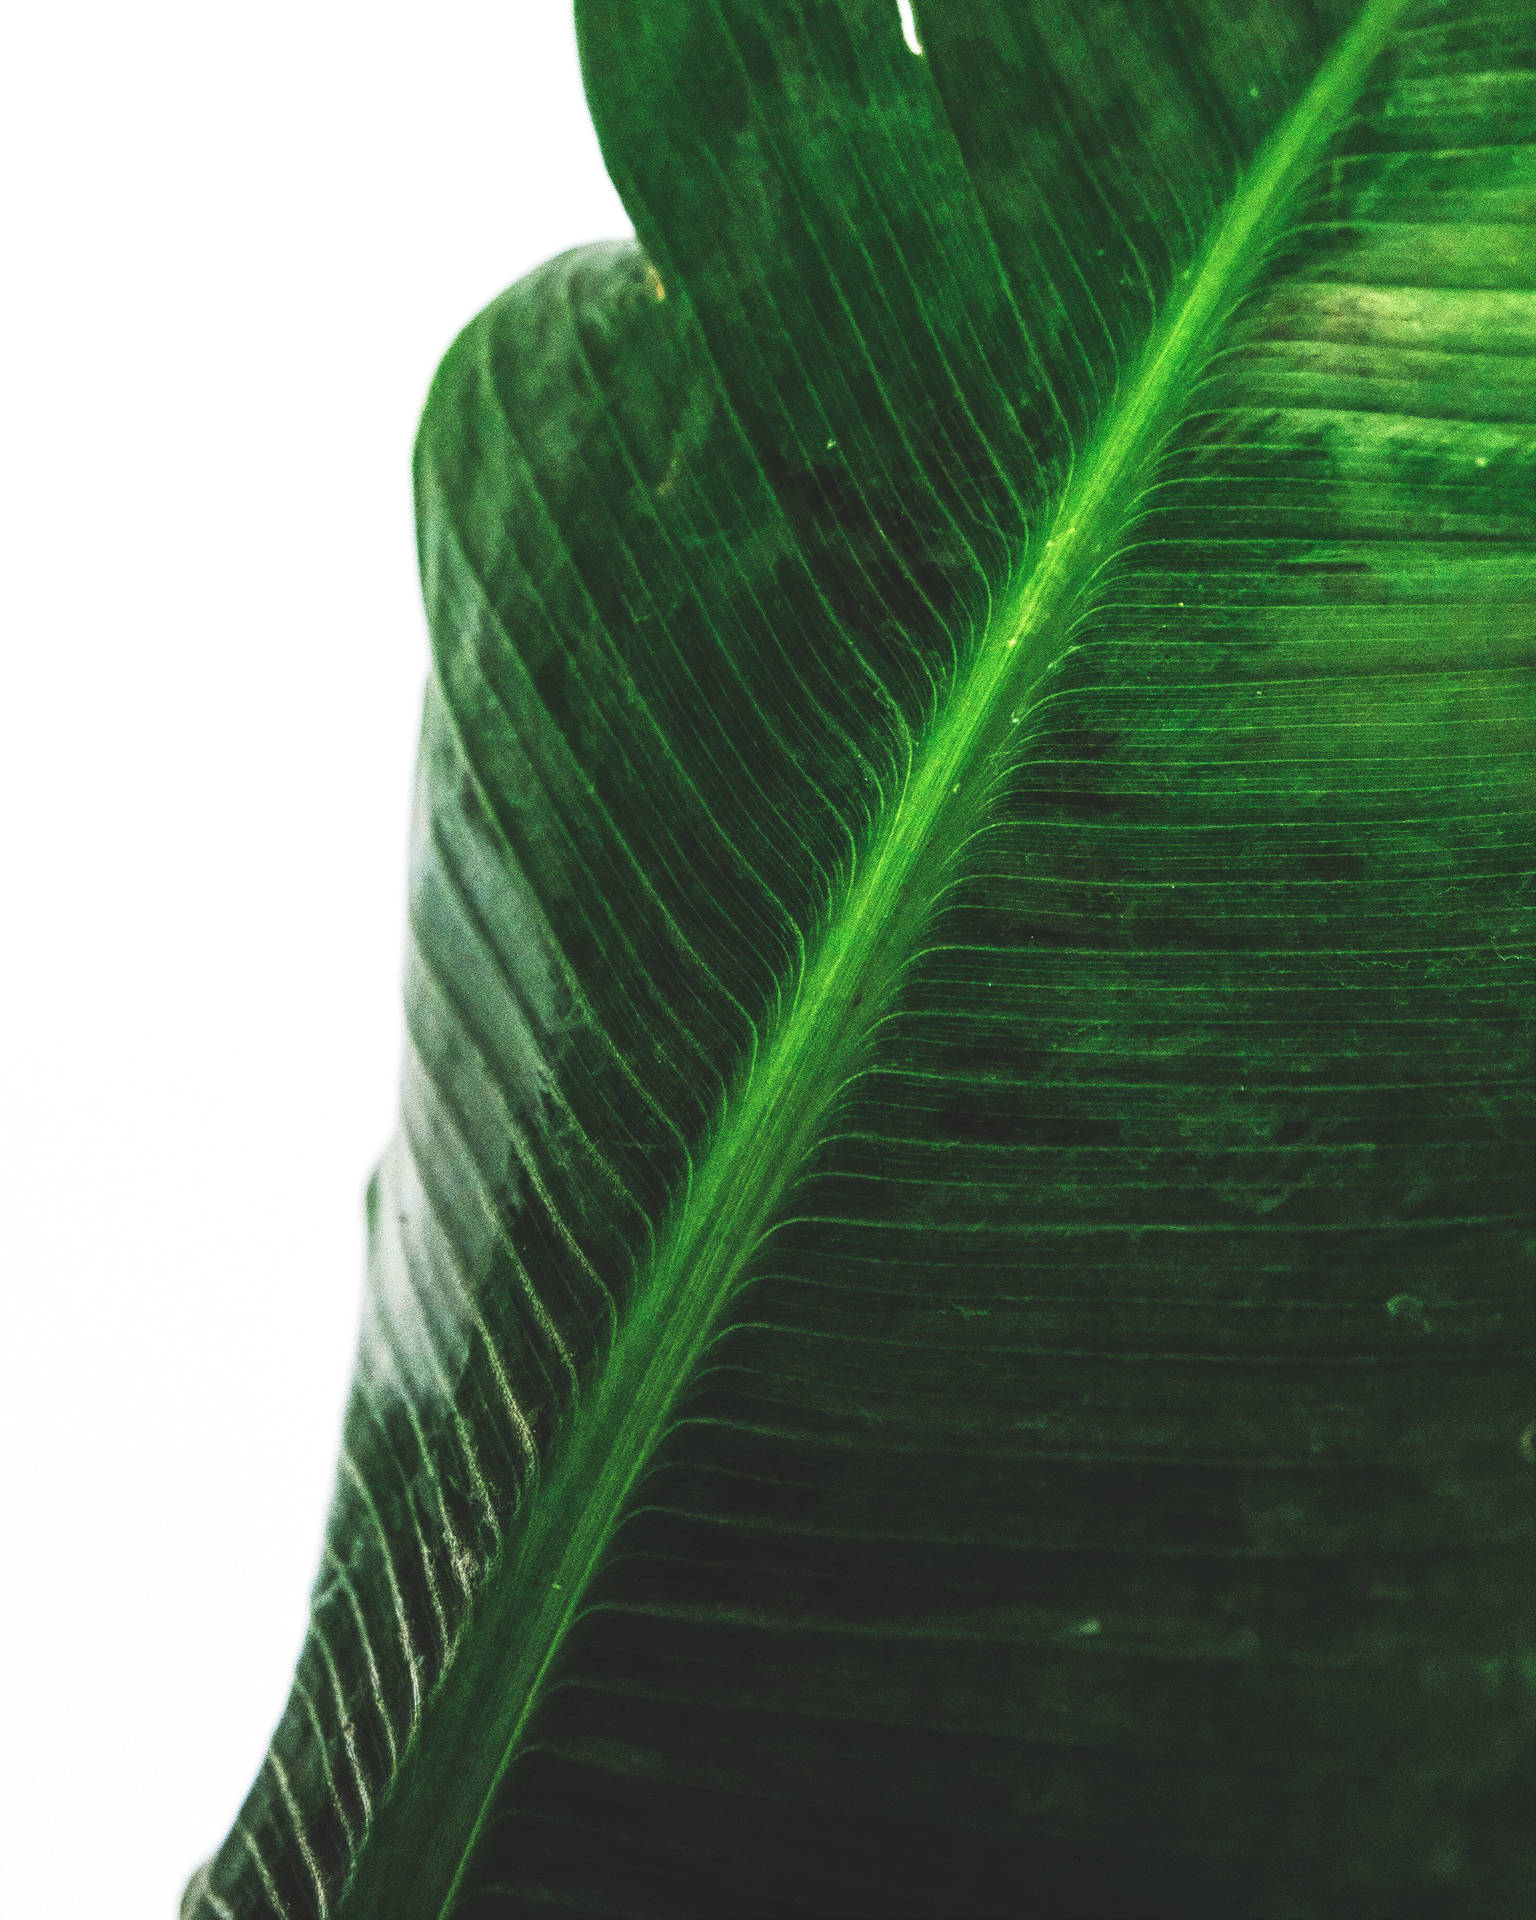 2944X3680 Banana Leaf Wallpaper and Background